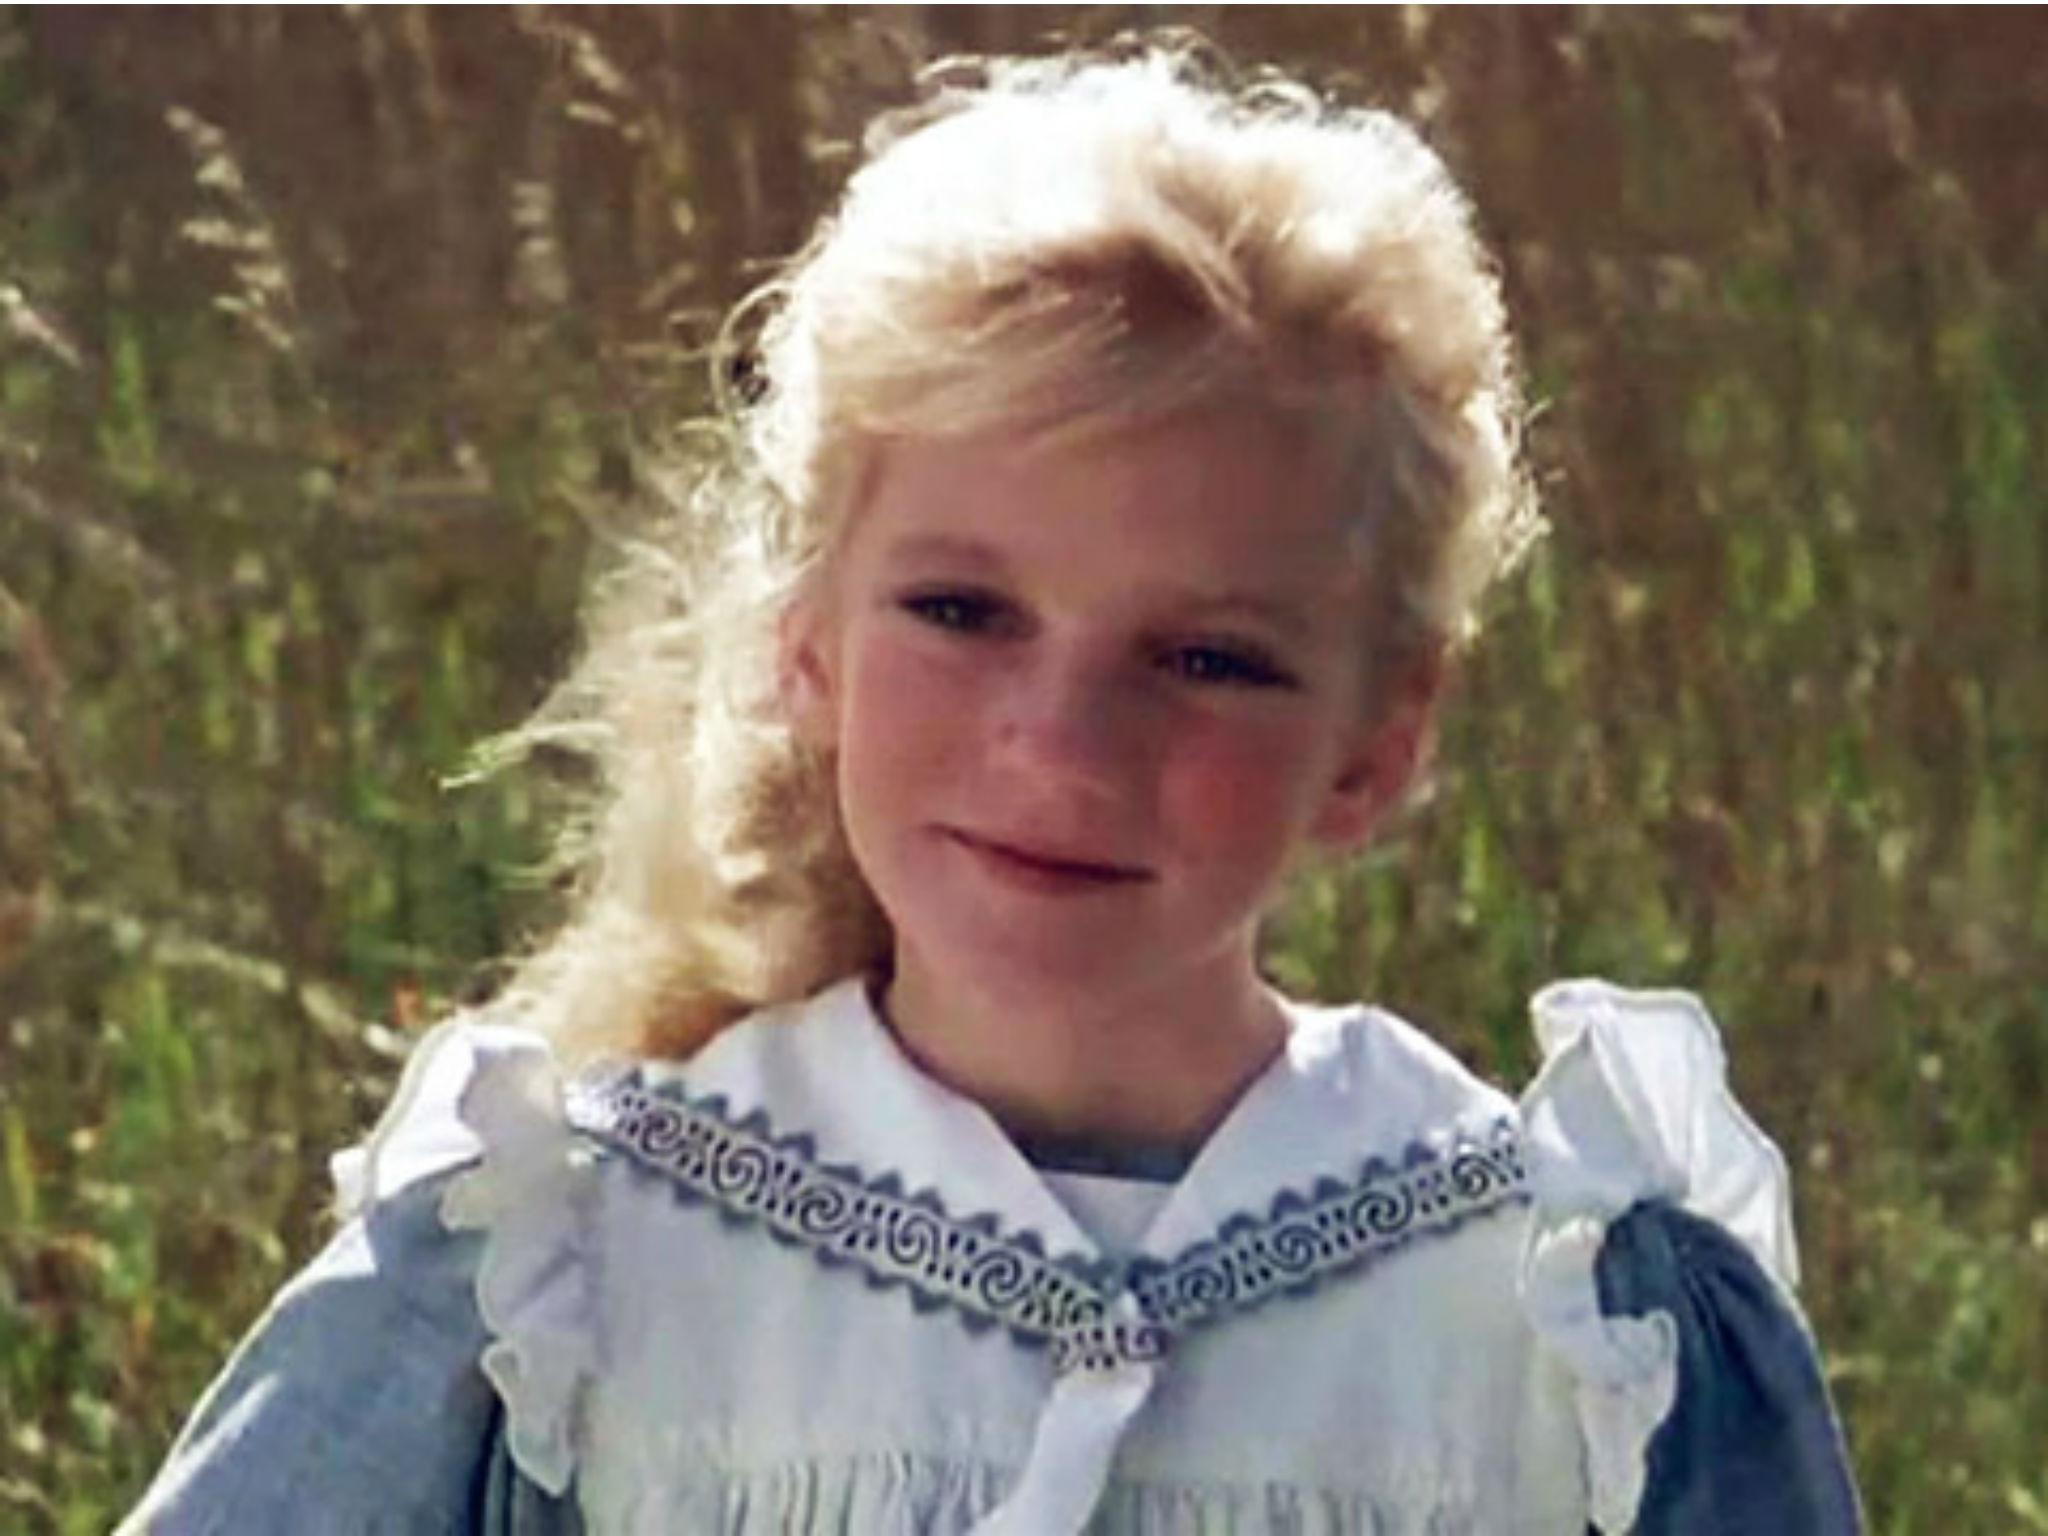 &#13;
Polley was a child star best known for the Disney Channel’s ‘Road to Avonlea’&#13;